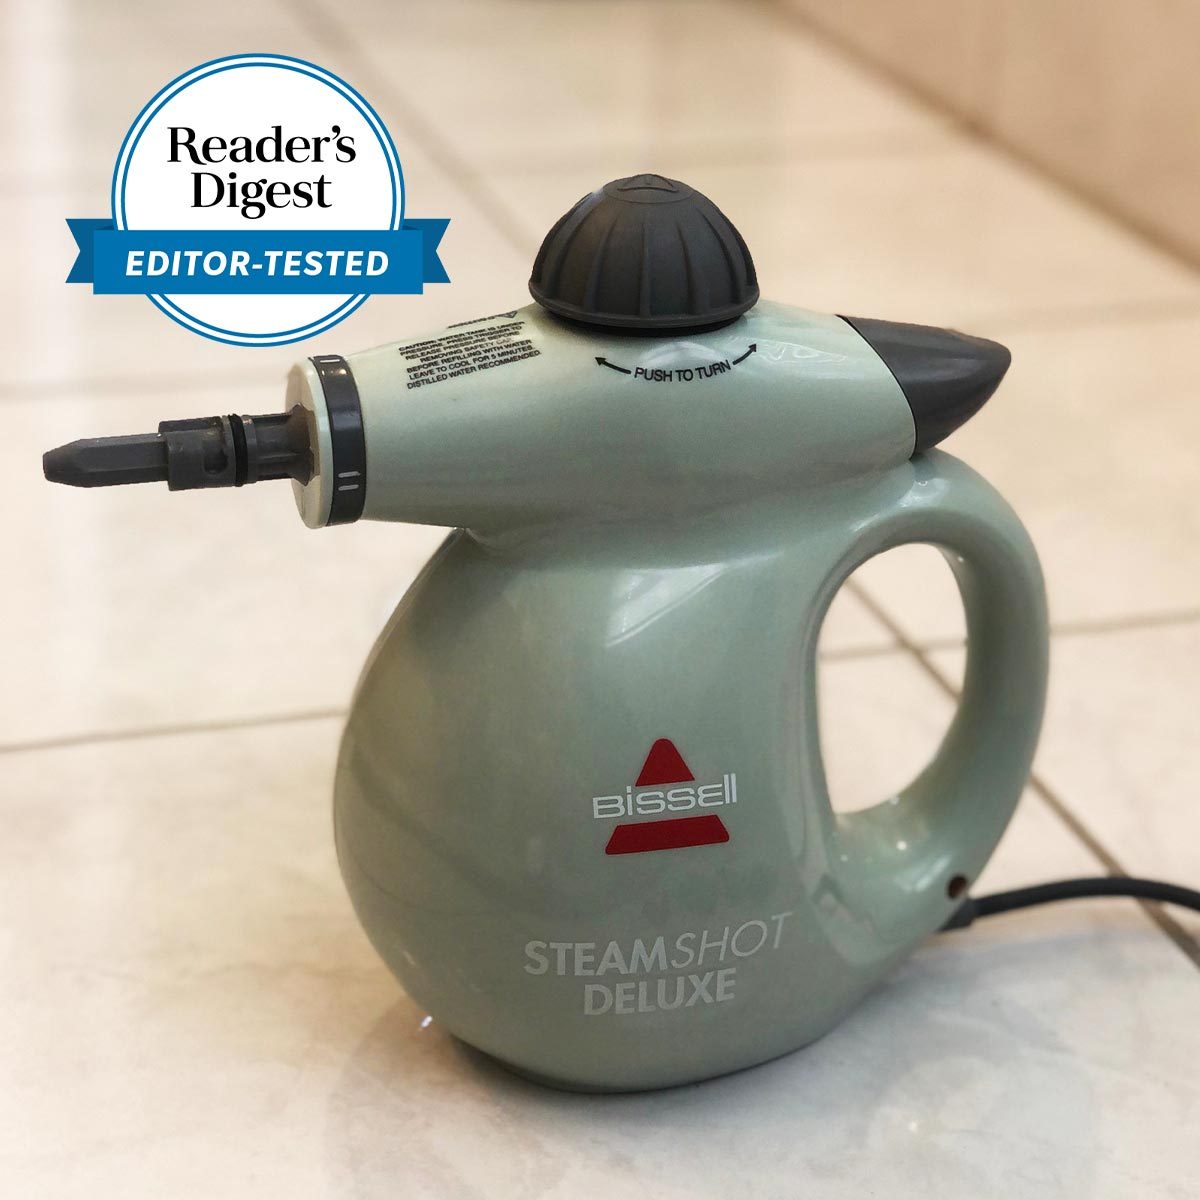 Review: The Bissell Steam Shot Is a Life Changer On Cleaning Day